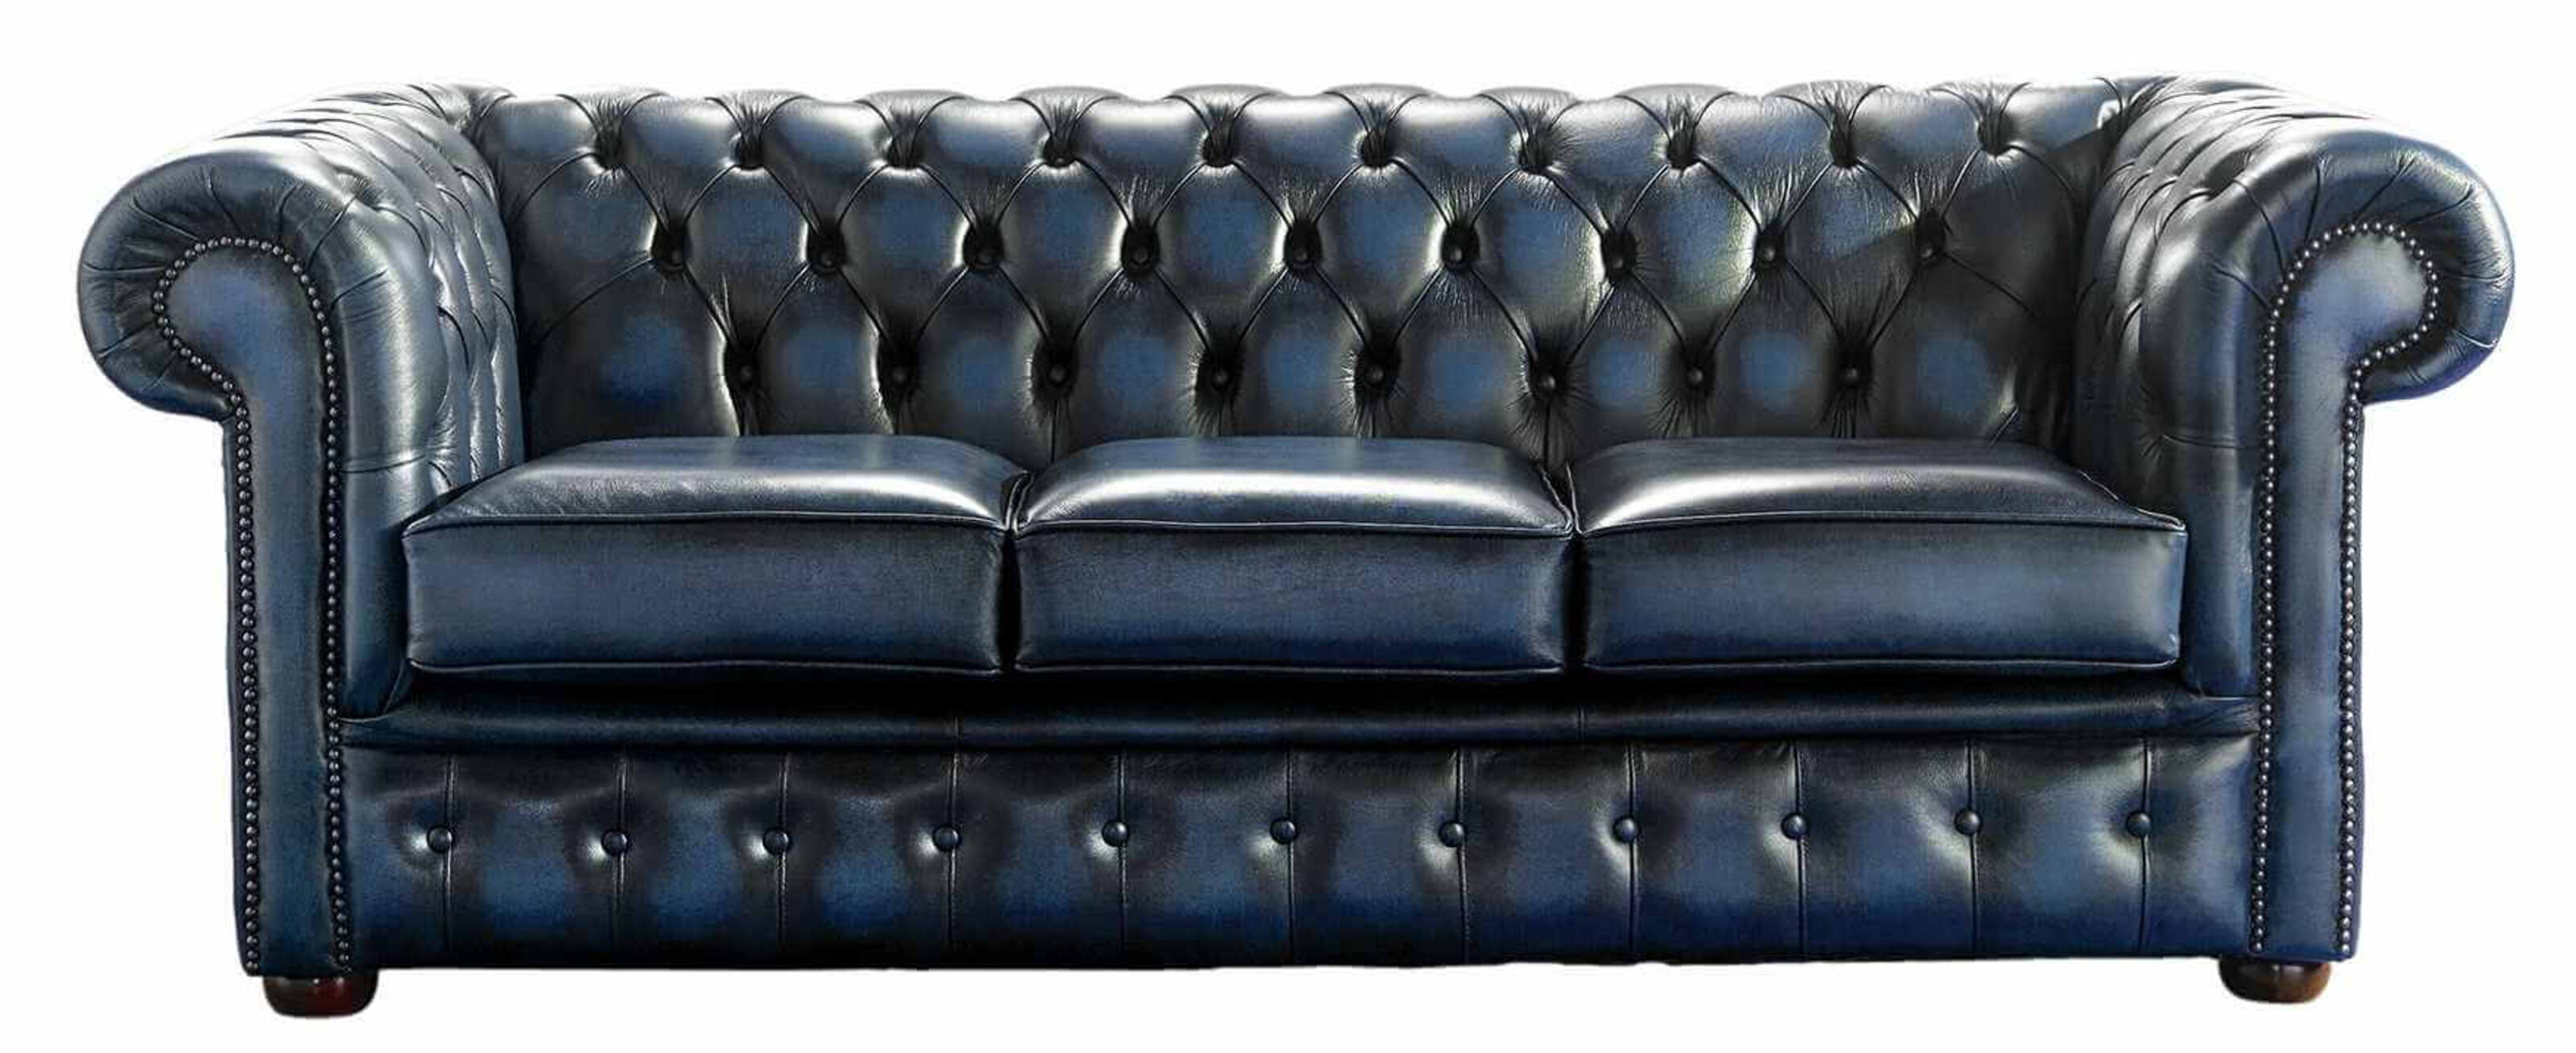 Elevate Your Living Room with a Stunning Leather Chesterfield Sofa  %Post Title